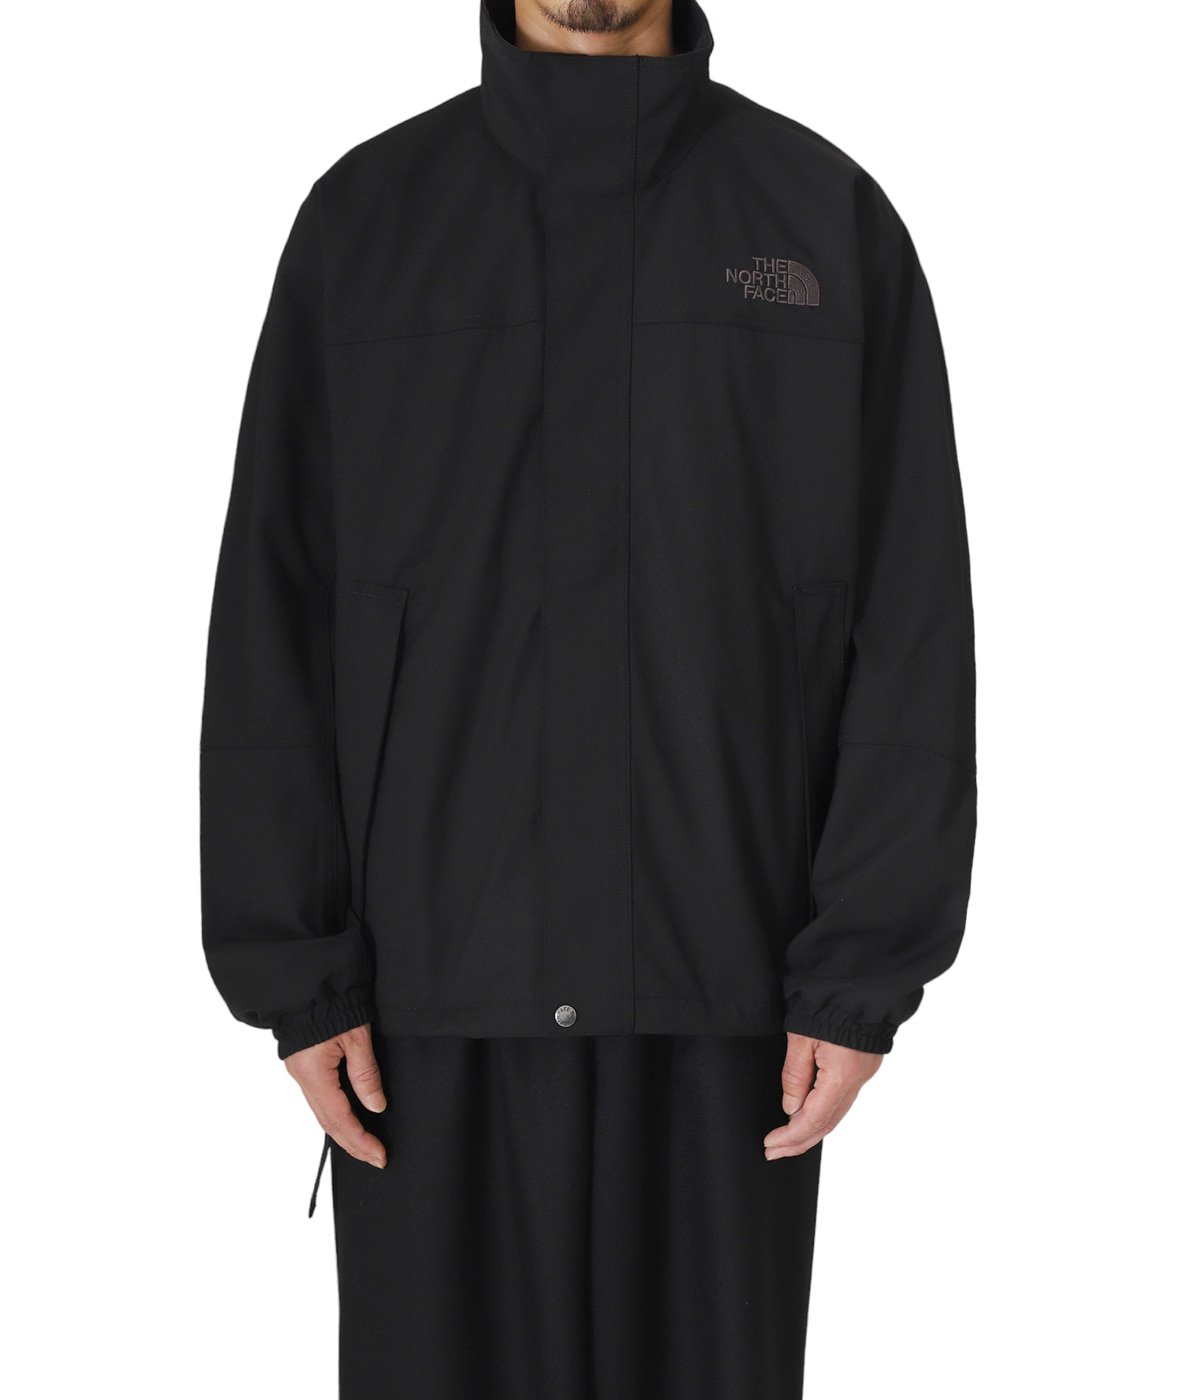 Wooly Hydrena Jacket | THE NORTH FACE(ザ ノースフェイス 